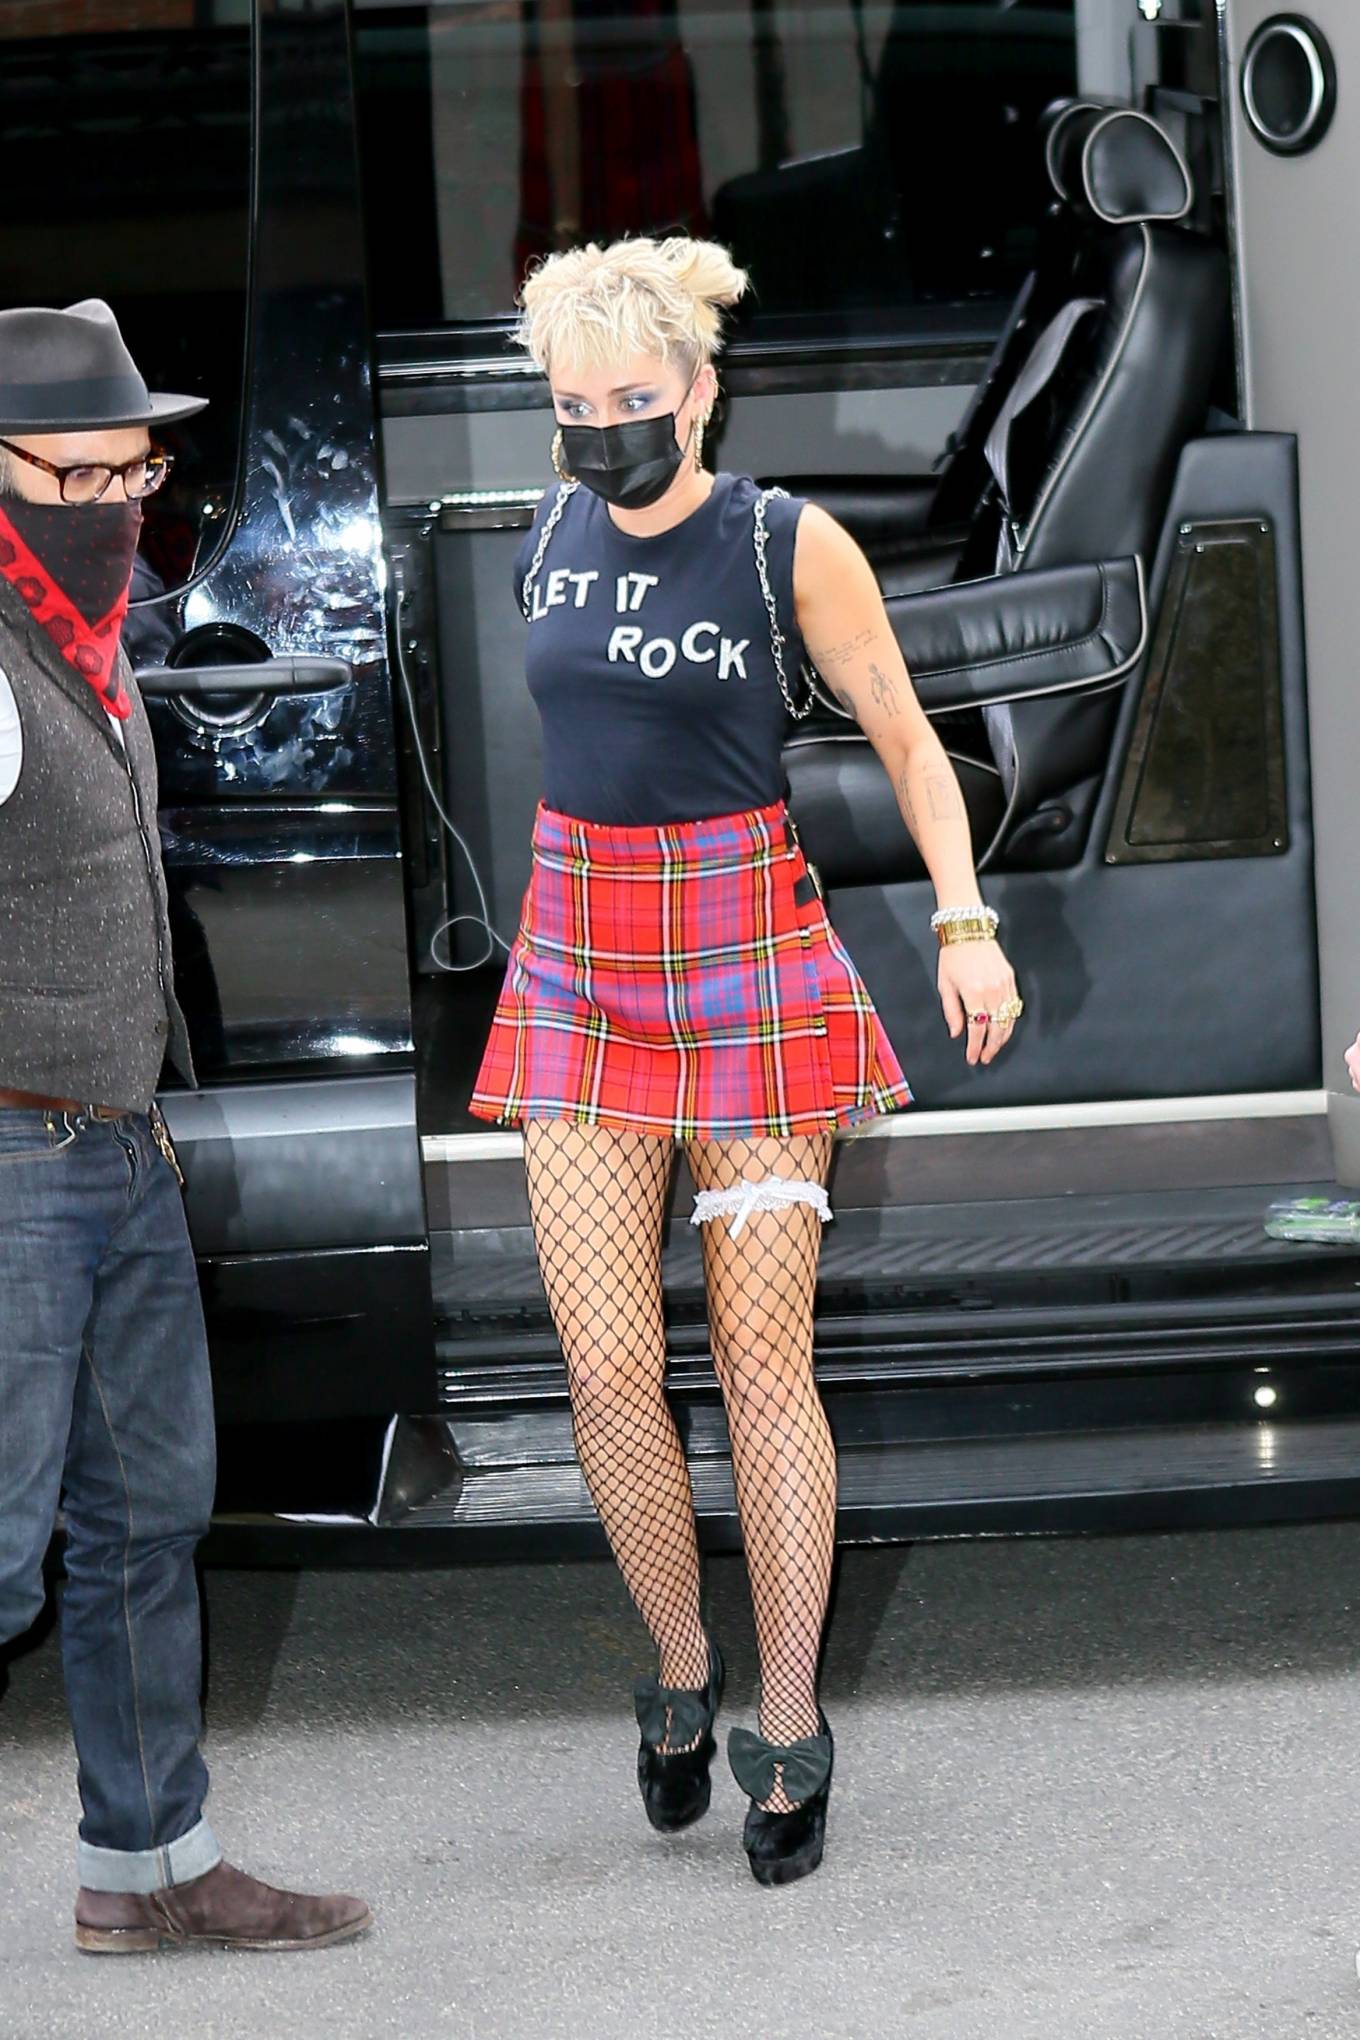 Miley Cyrus – Dons punk rock style at her hotel in New York | GotCeleb